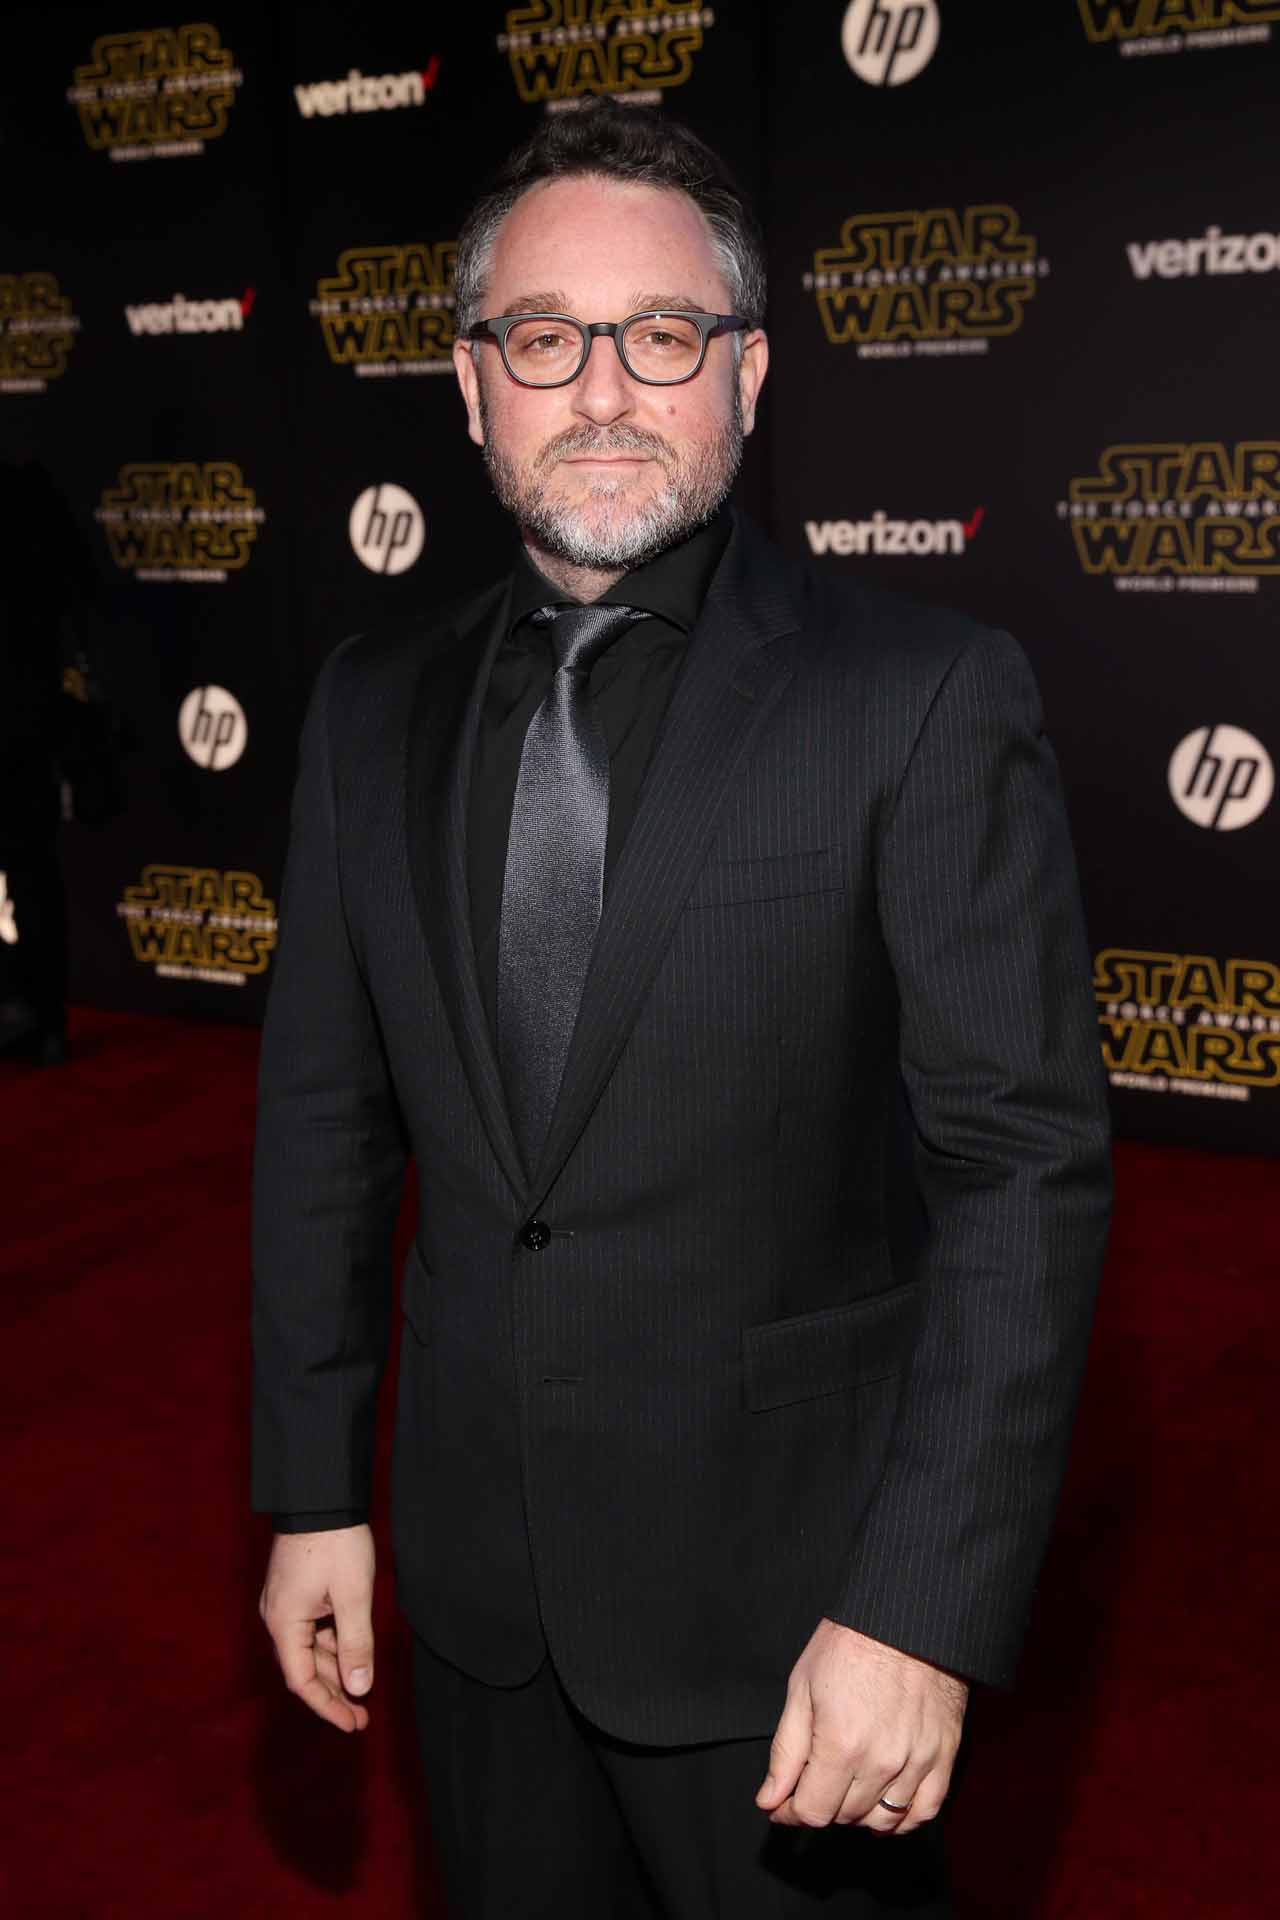 HOLLYWOOD, CA - DECEMBER 14: Director Colin Trevorrow attends the World Premiere of ?Star Wars: The Force Awakens? at the Dolby, El Capitan, and TCL Theatres on December 14, 2015 in Hollywood, California.  (Photo by Jesse Grant/Getty Images for Disney) *** Local Caption *** Colin Trevorrow